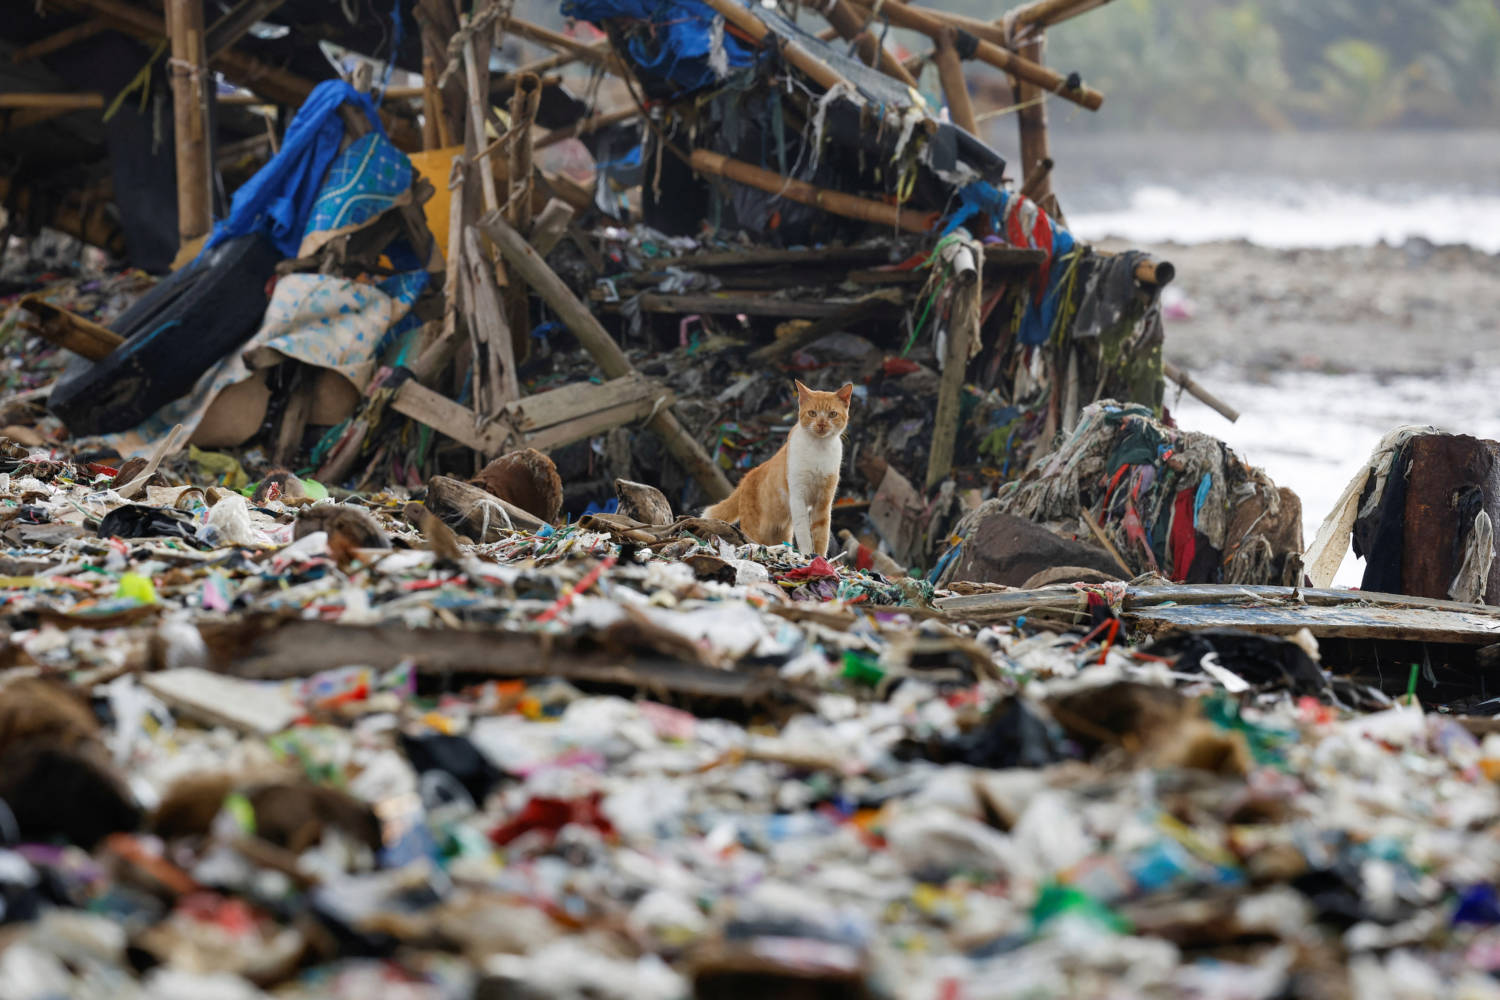 Indonesian Fishing Village Grapples With Piles Of Trash Amid Erratic High Tides